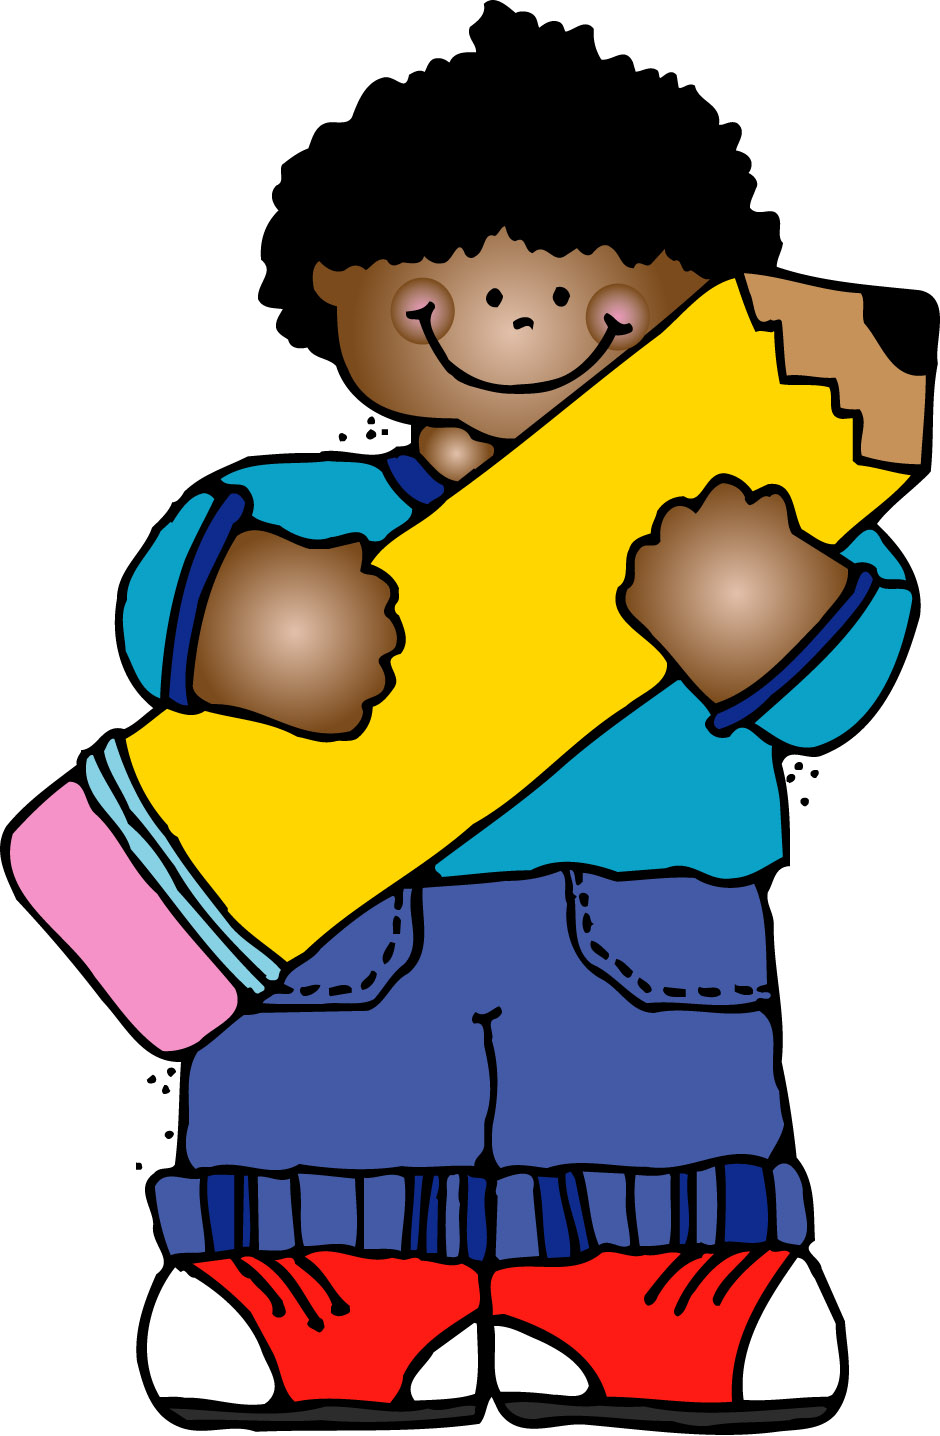 Child writing clipart free